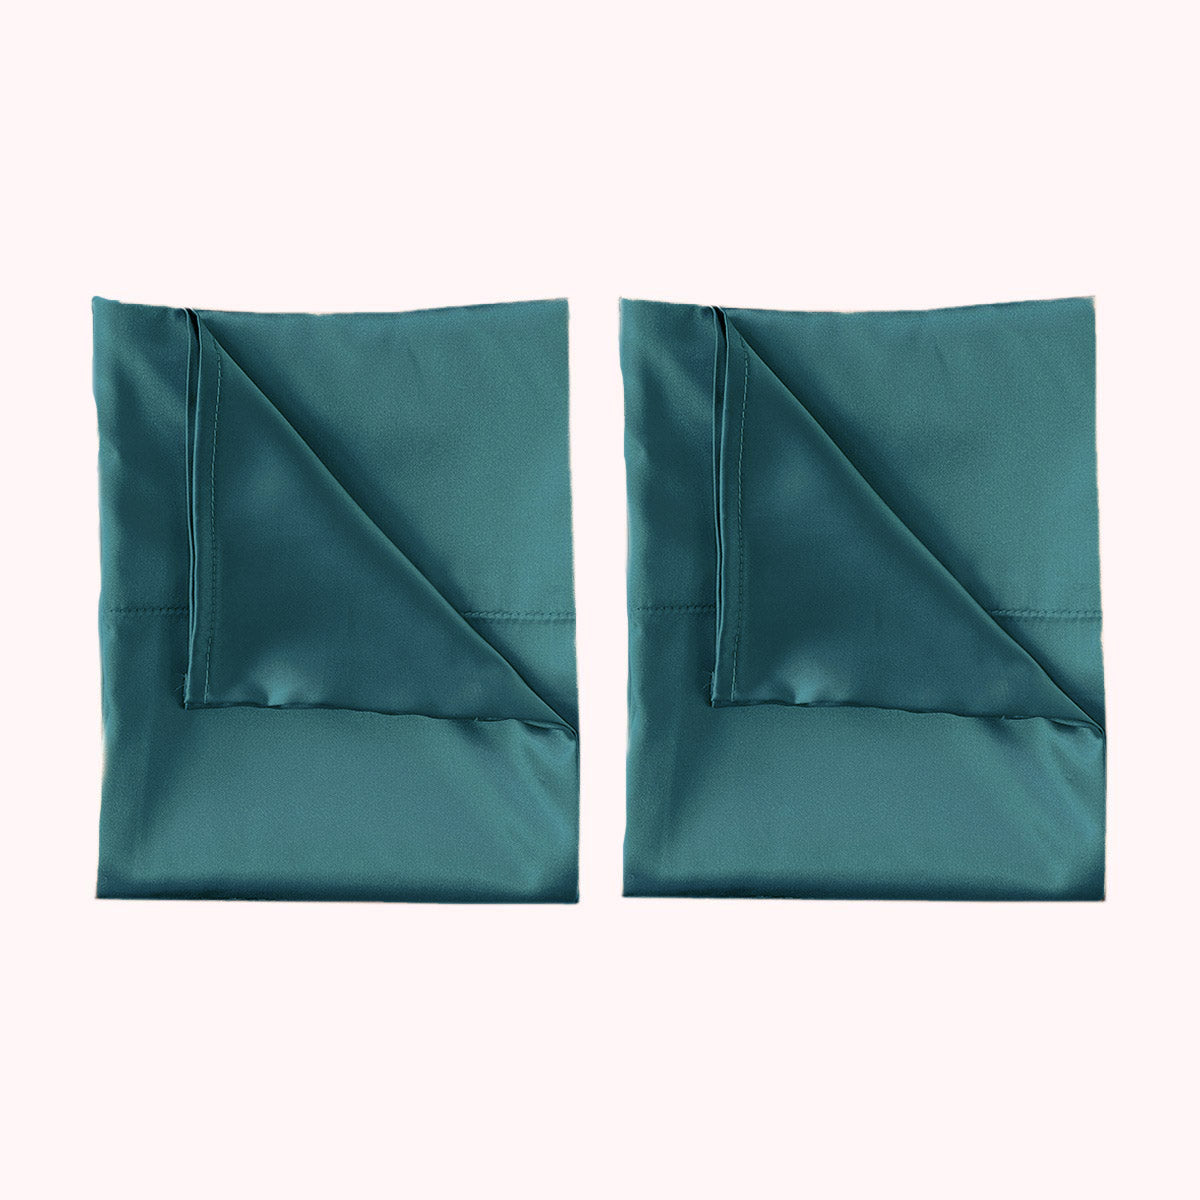 2 folded satin pillowcases in teal